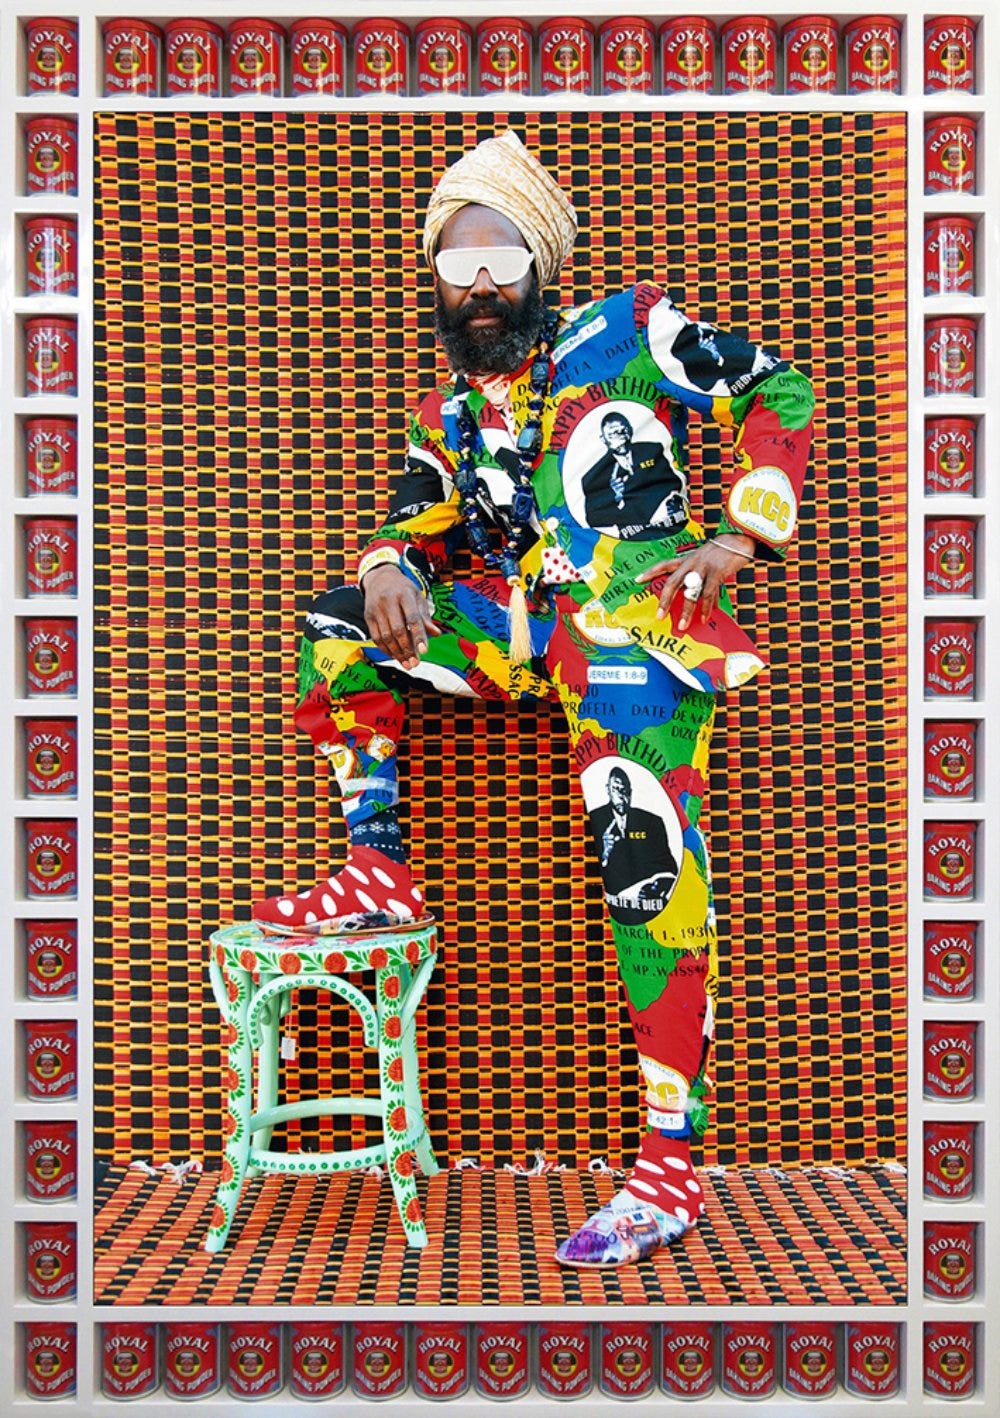 Hassan Hajjaj: A Taste of Things to Come at Barakat Contemporary